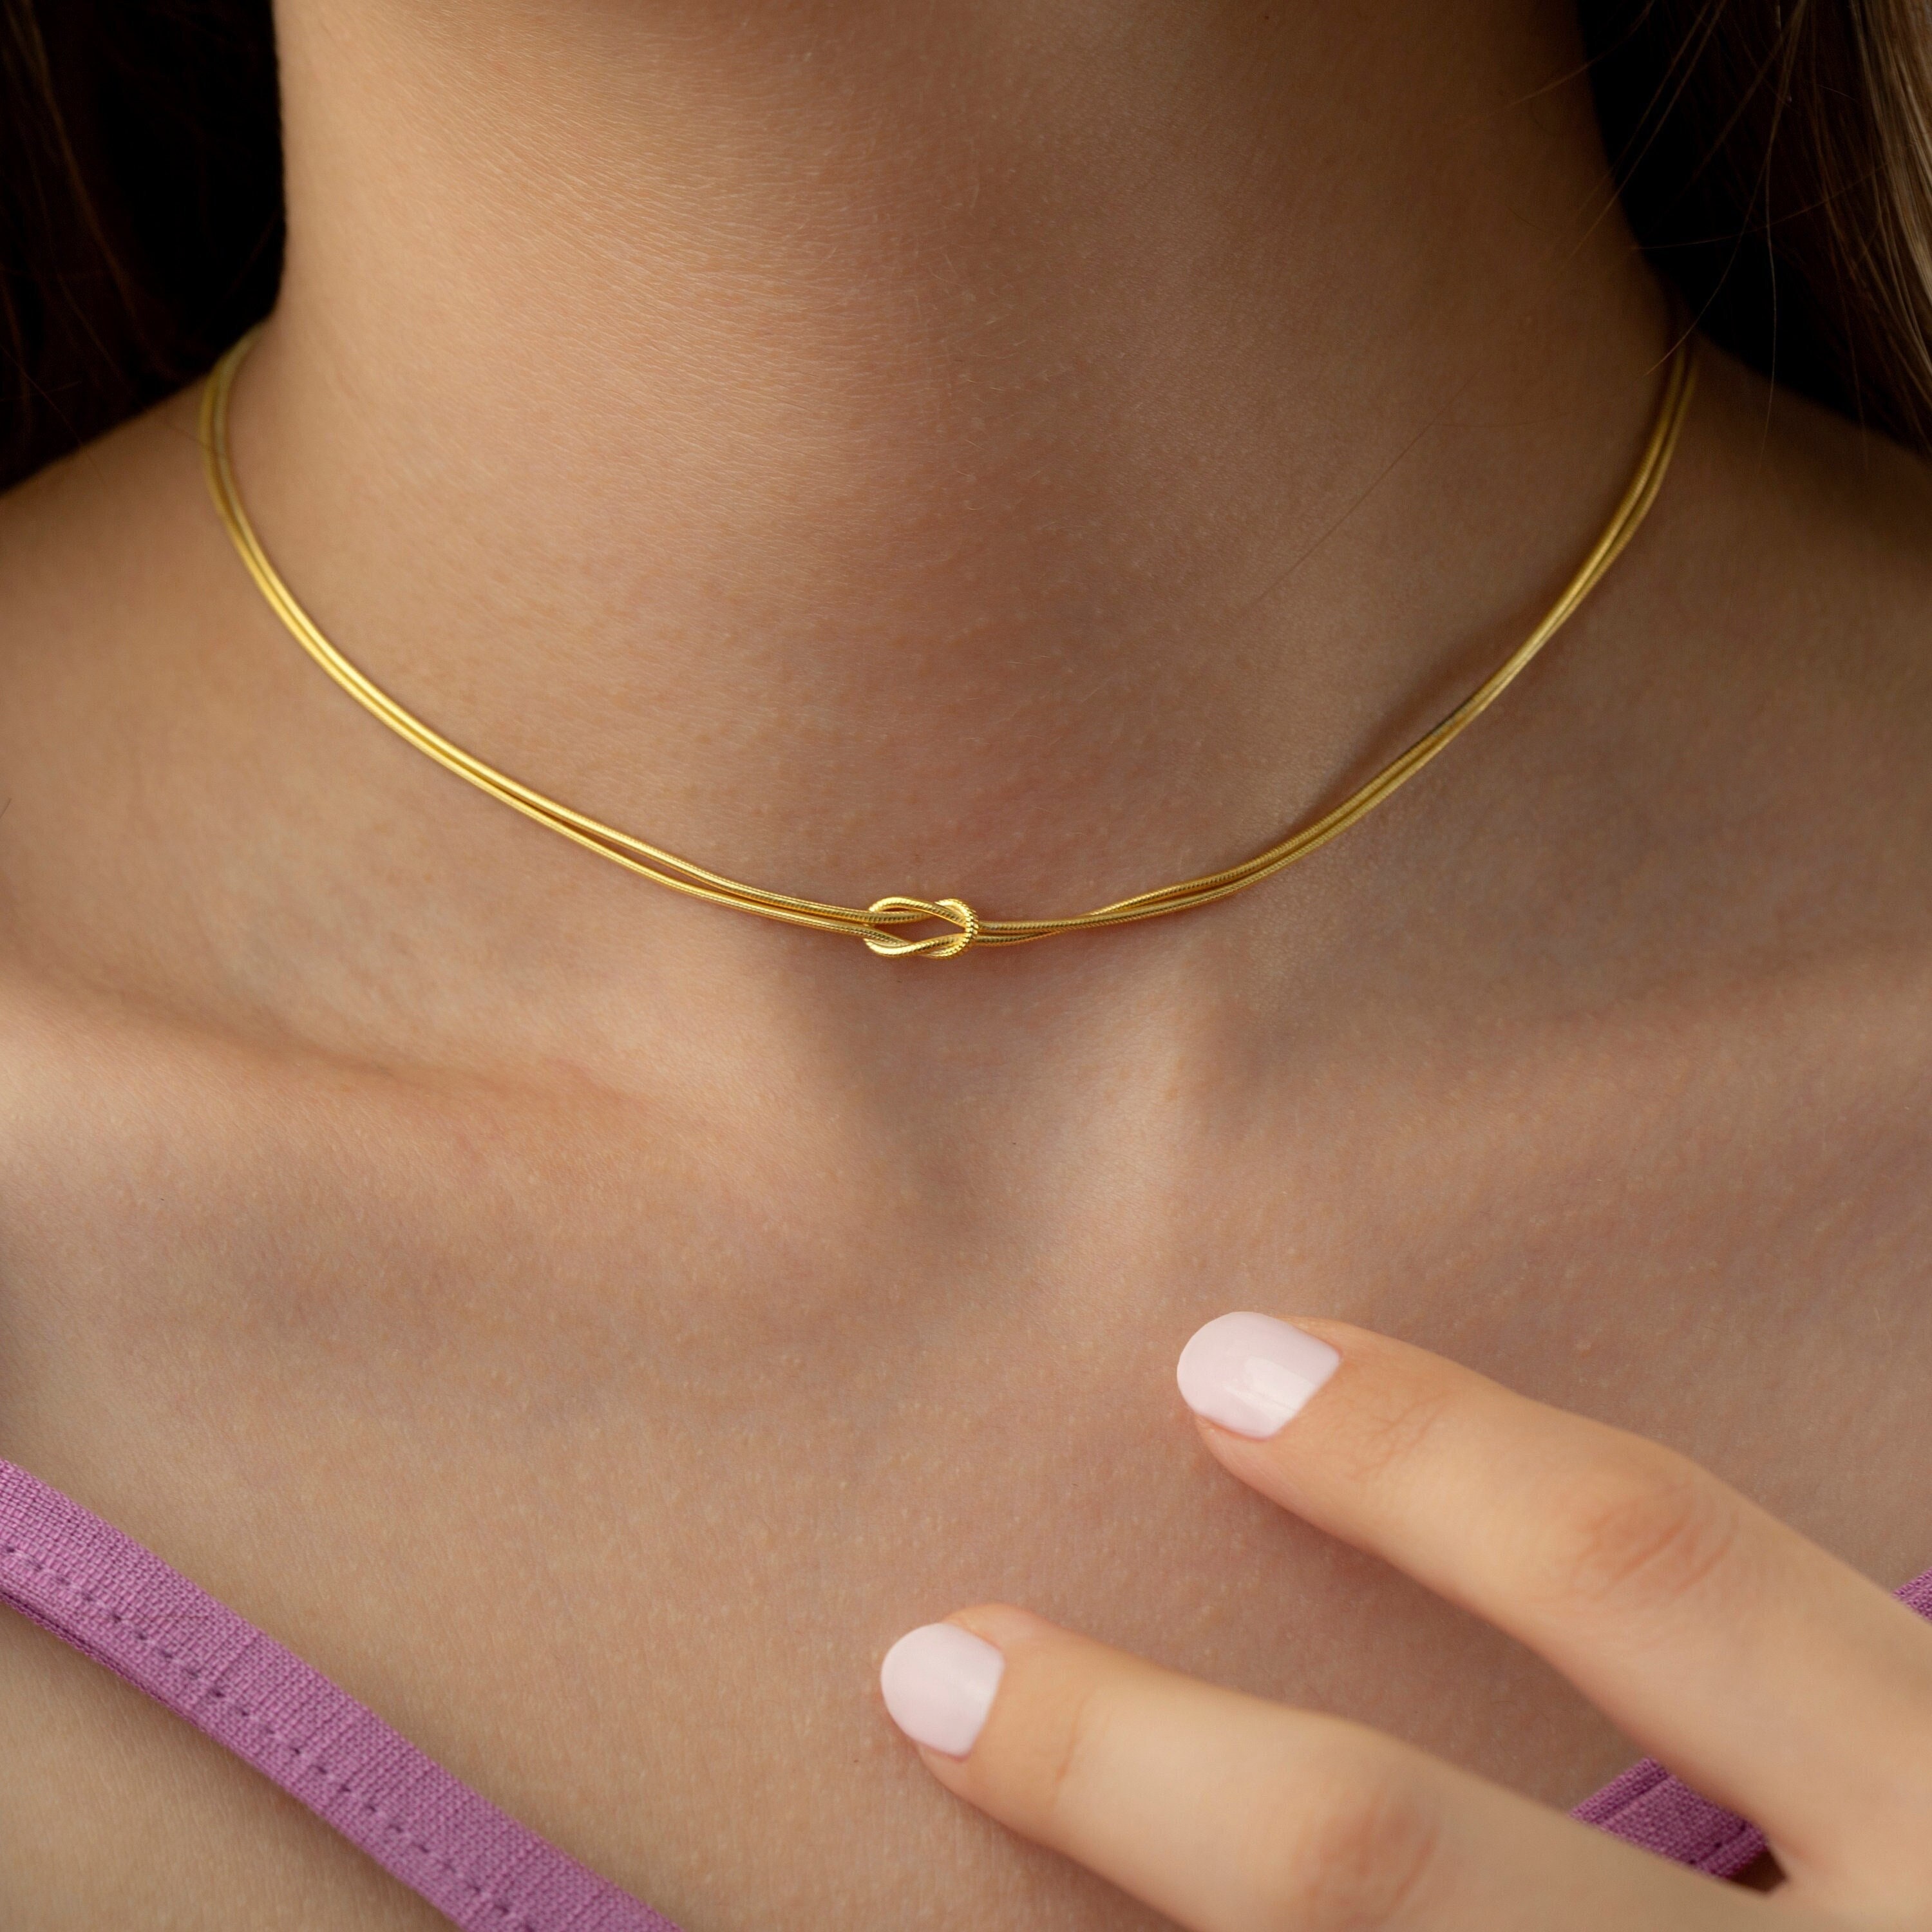 14K Gold Choker Necklace for Women, Layered Short Double Choker Necklace Set, Dainty Modern Minimalist Jewelry Sterling Silver, Rose Gold